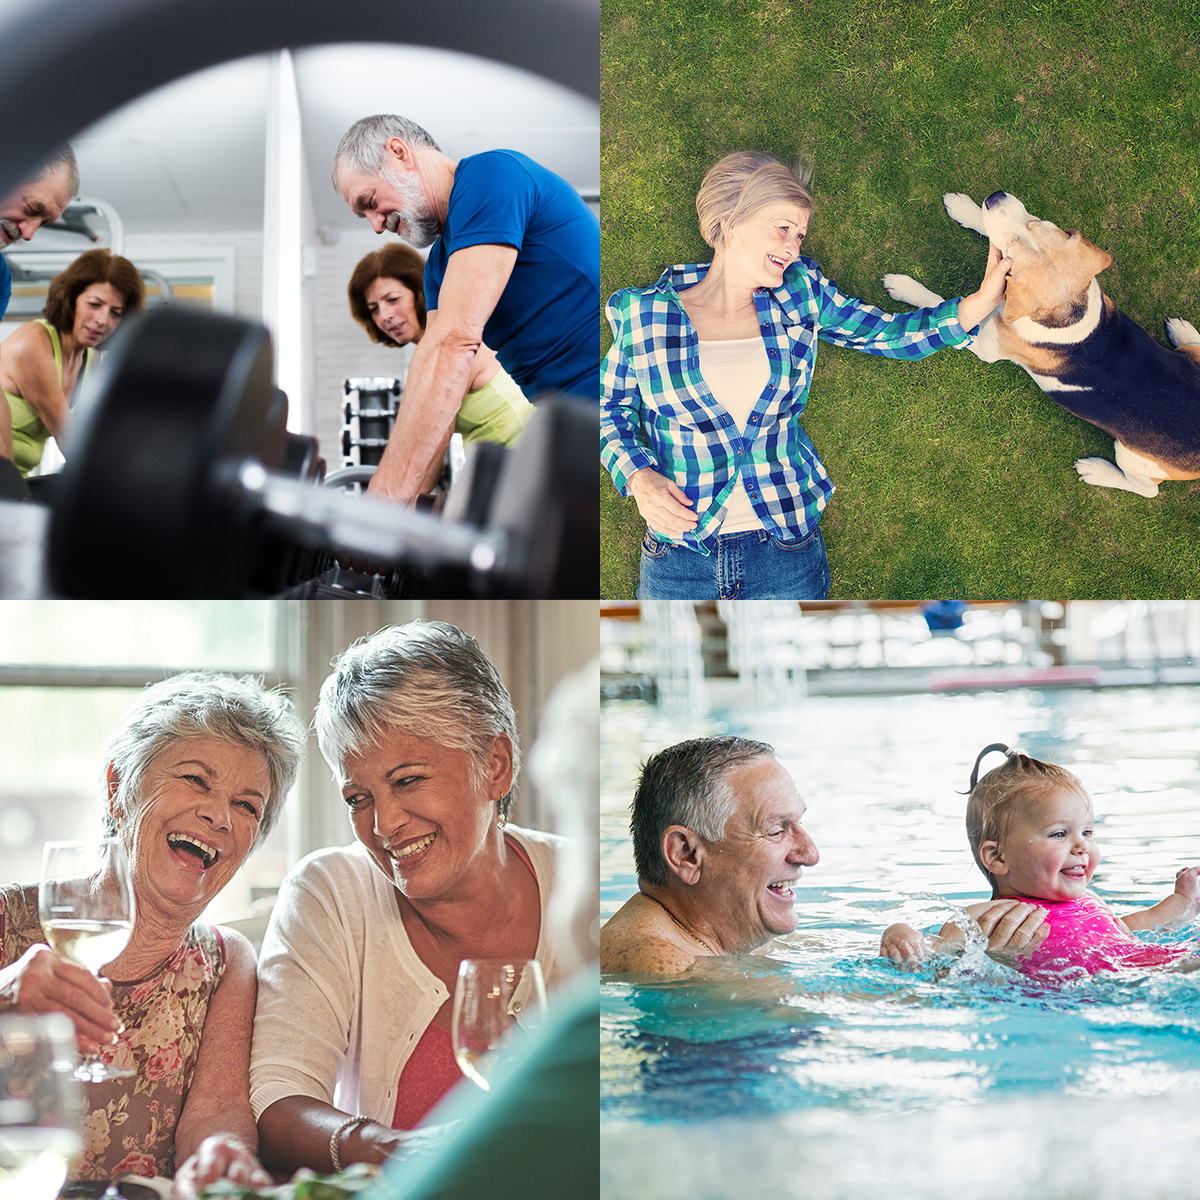 4 images of couple in fitness room, woman with dog, female friends dining, and grandfather with grandchild in swimming pool